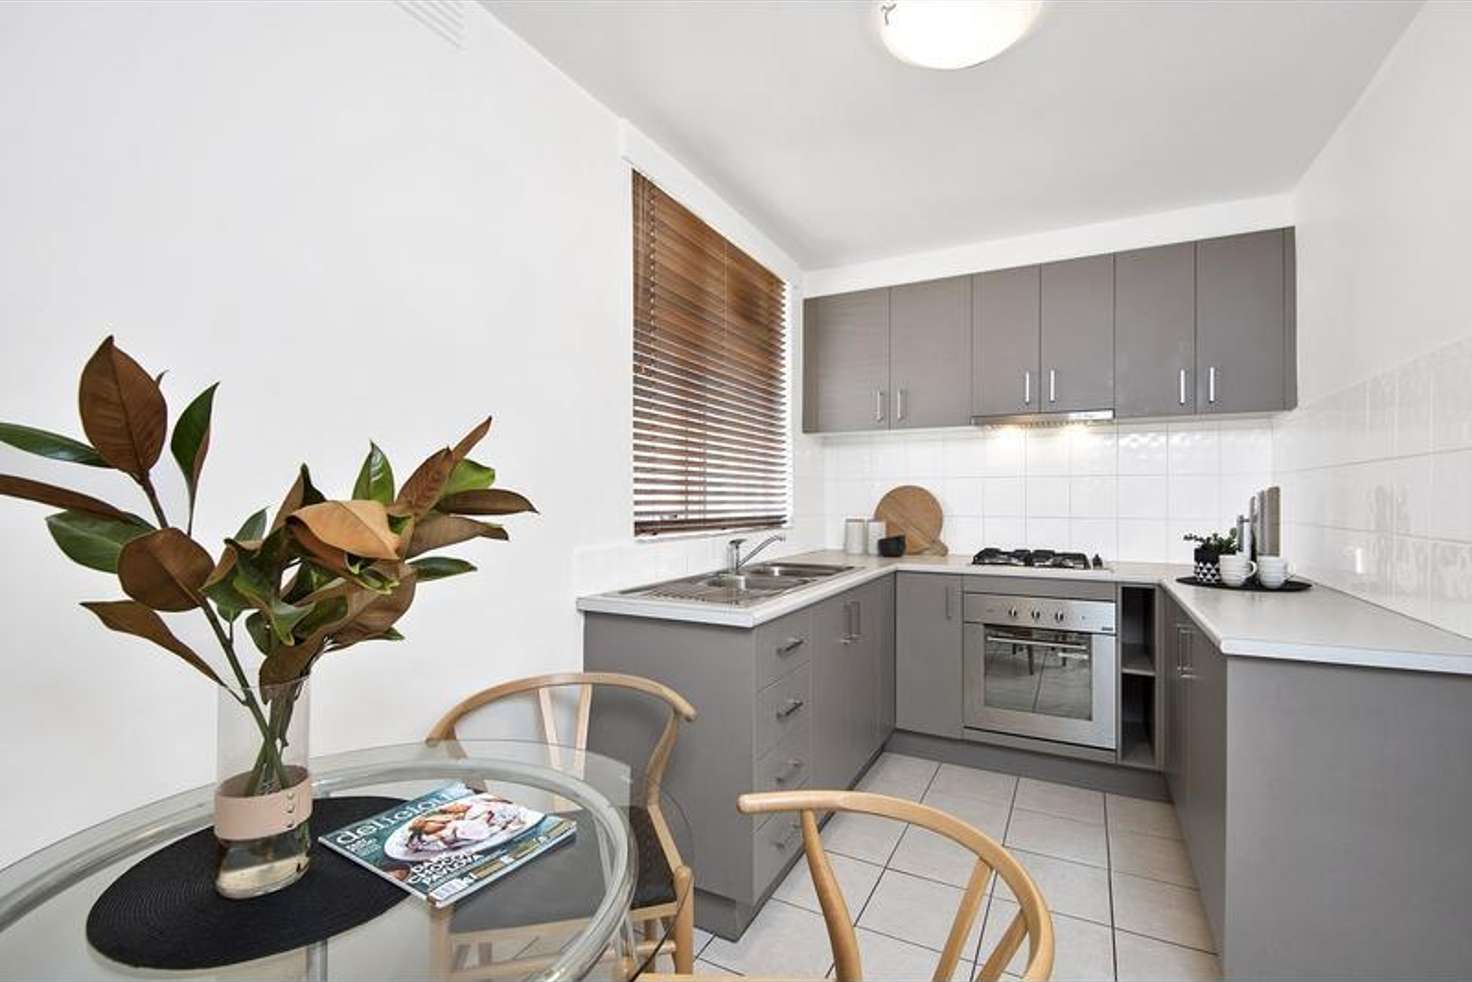 Main view of Homely apartment listing, 18/1 Duncraig Avenue, Armadale VIC 3143